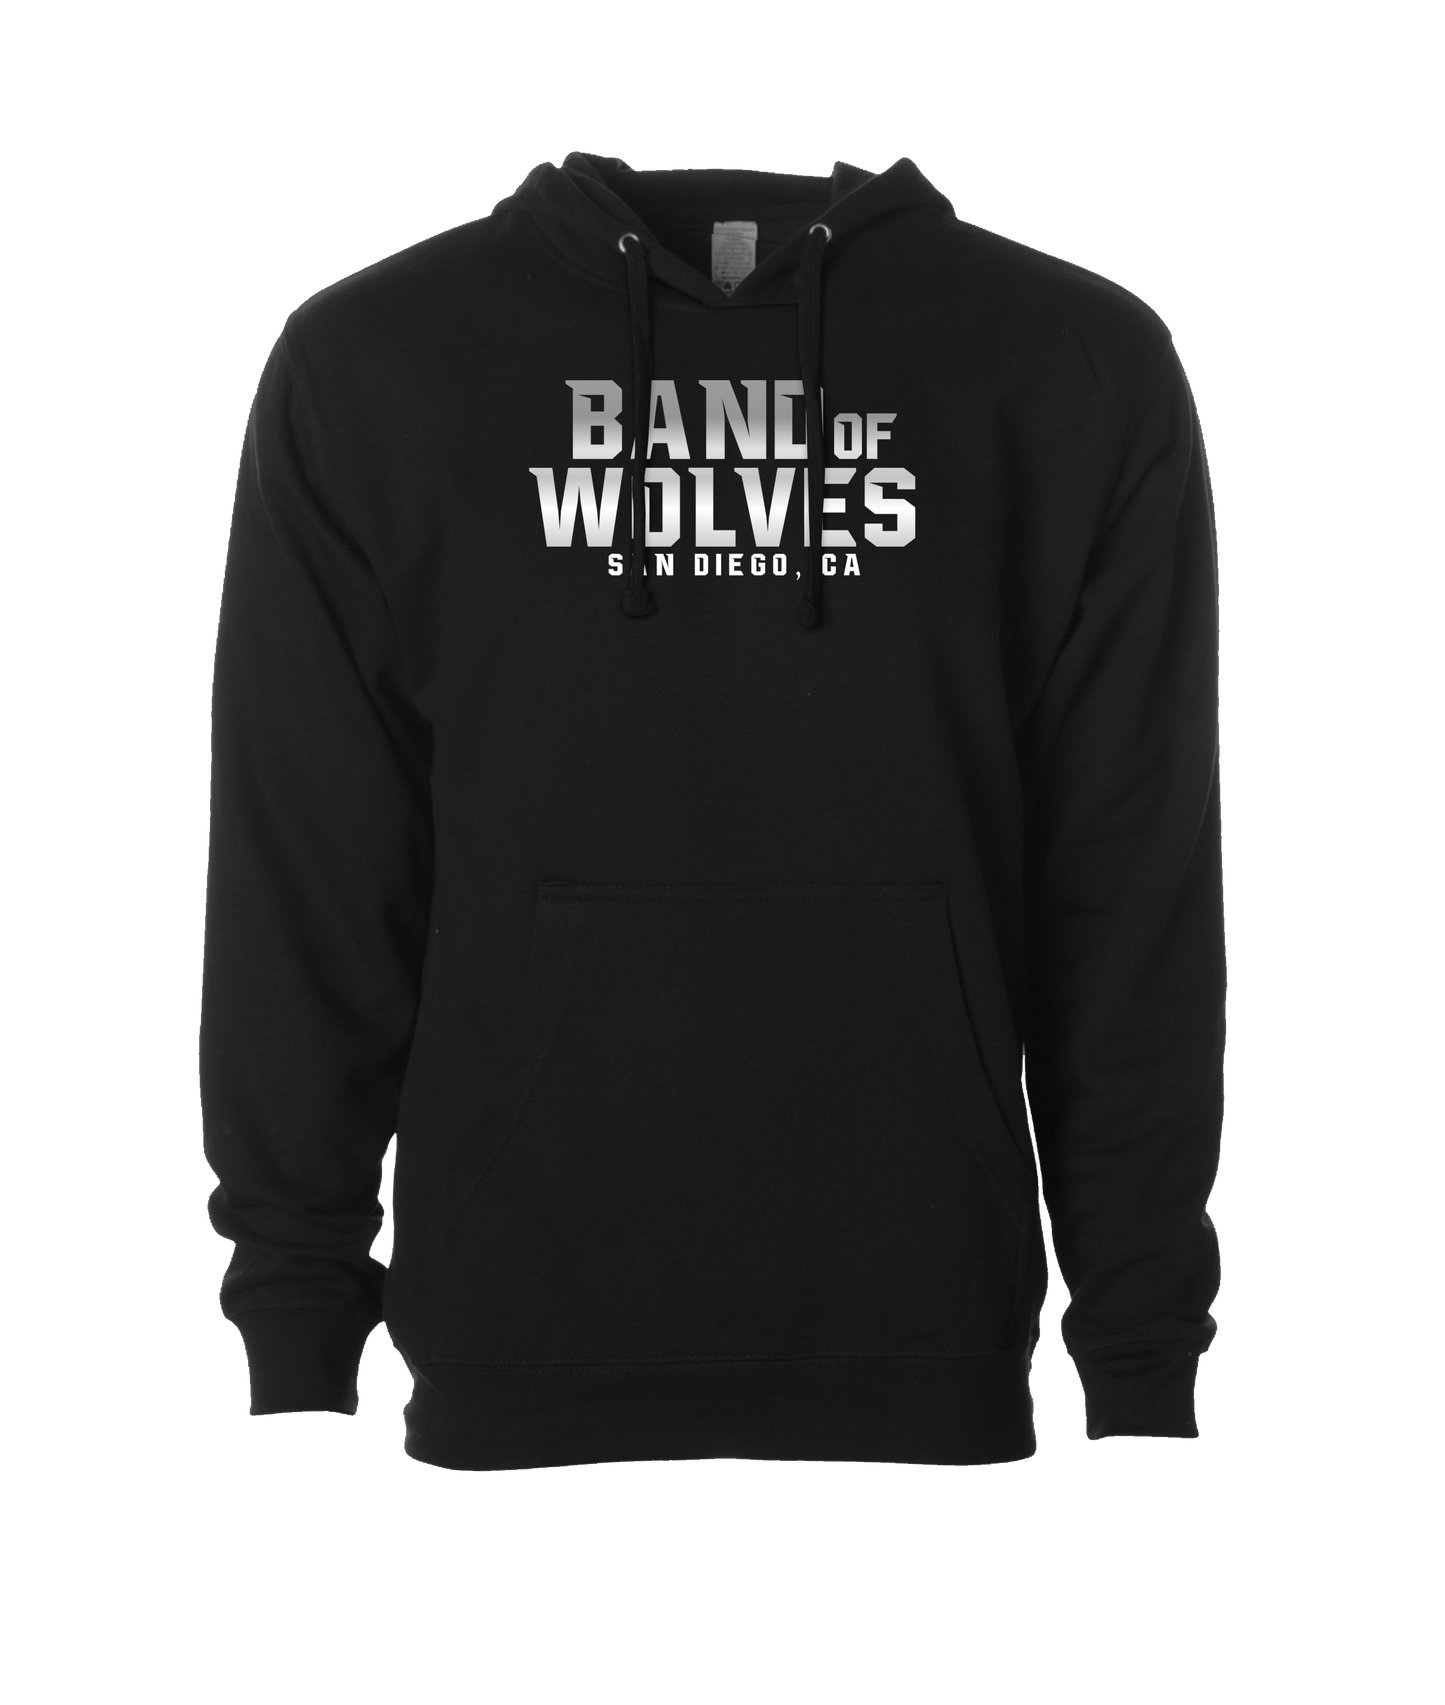 Band of Wolves - Howlin' At The Moon - Black Hoodie